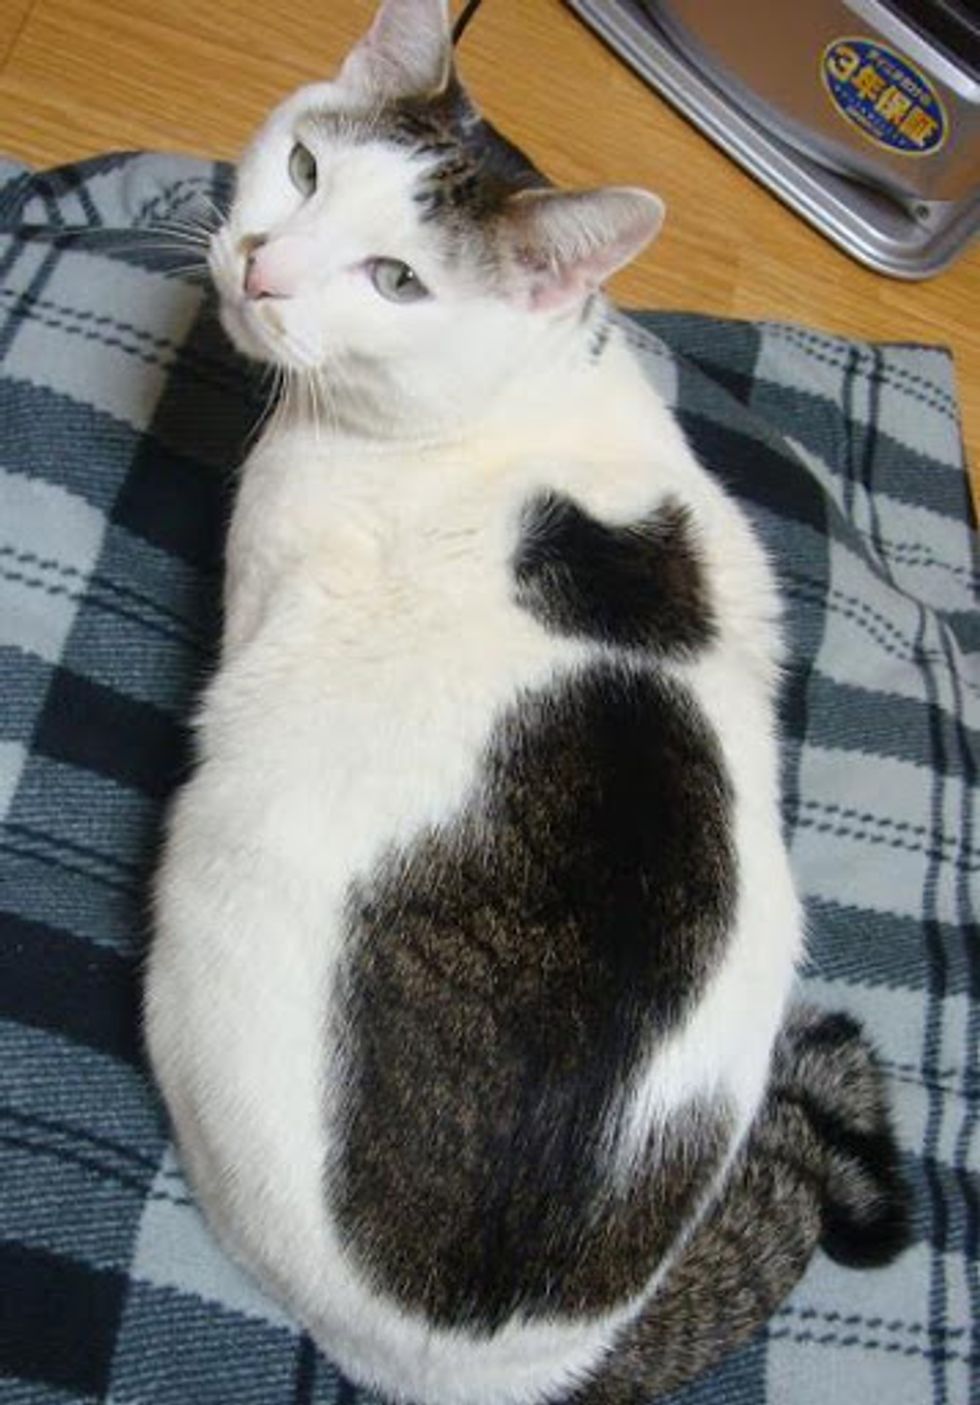 Cat Has Another Cat on His Back